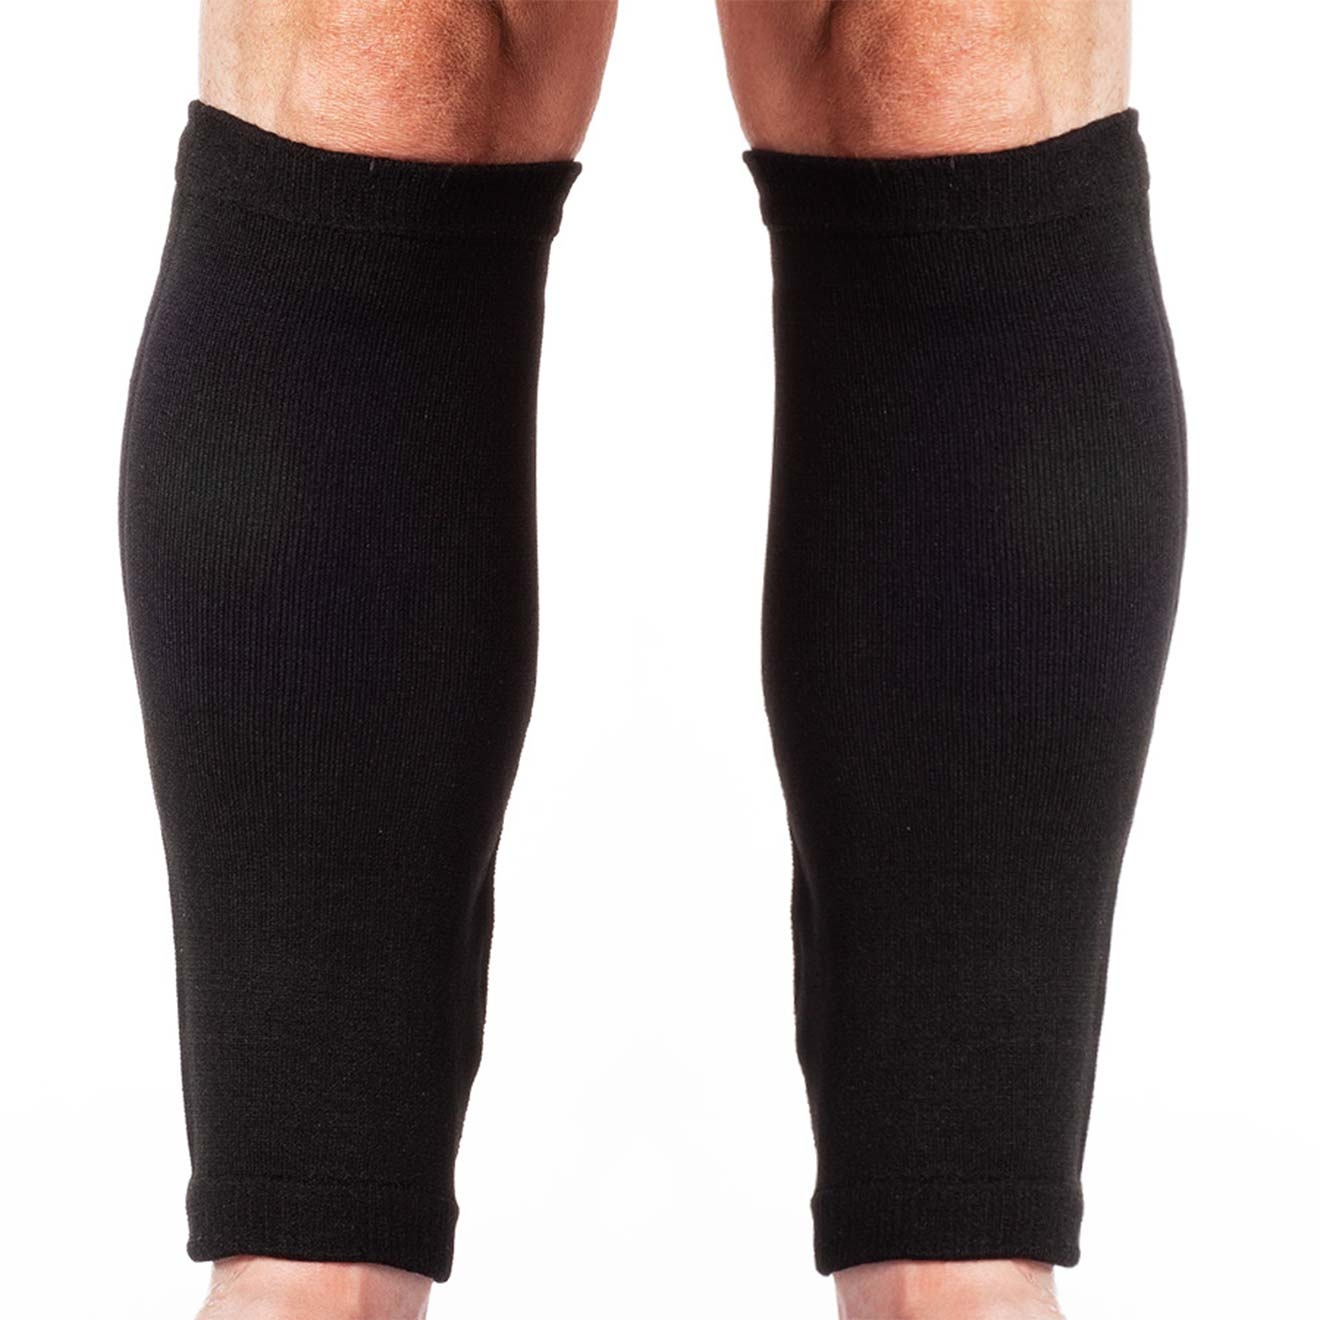 Leg Sleeves, Full Fit – Frail skin protection for larger & swollen legs Small – Limb Keepers